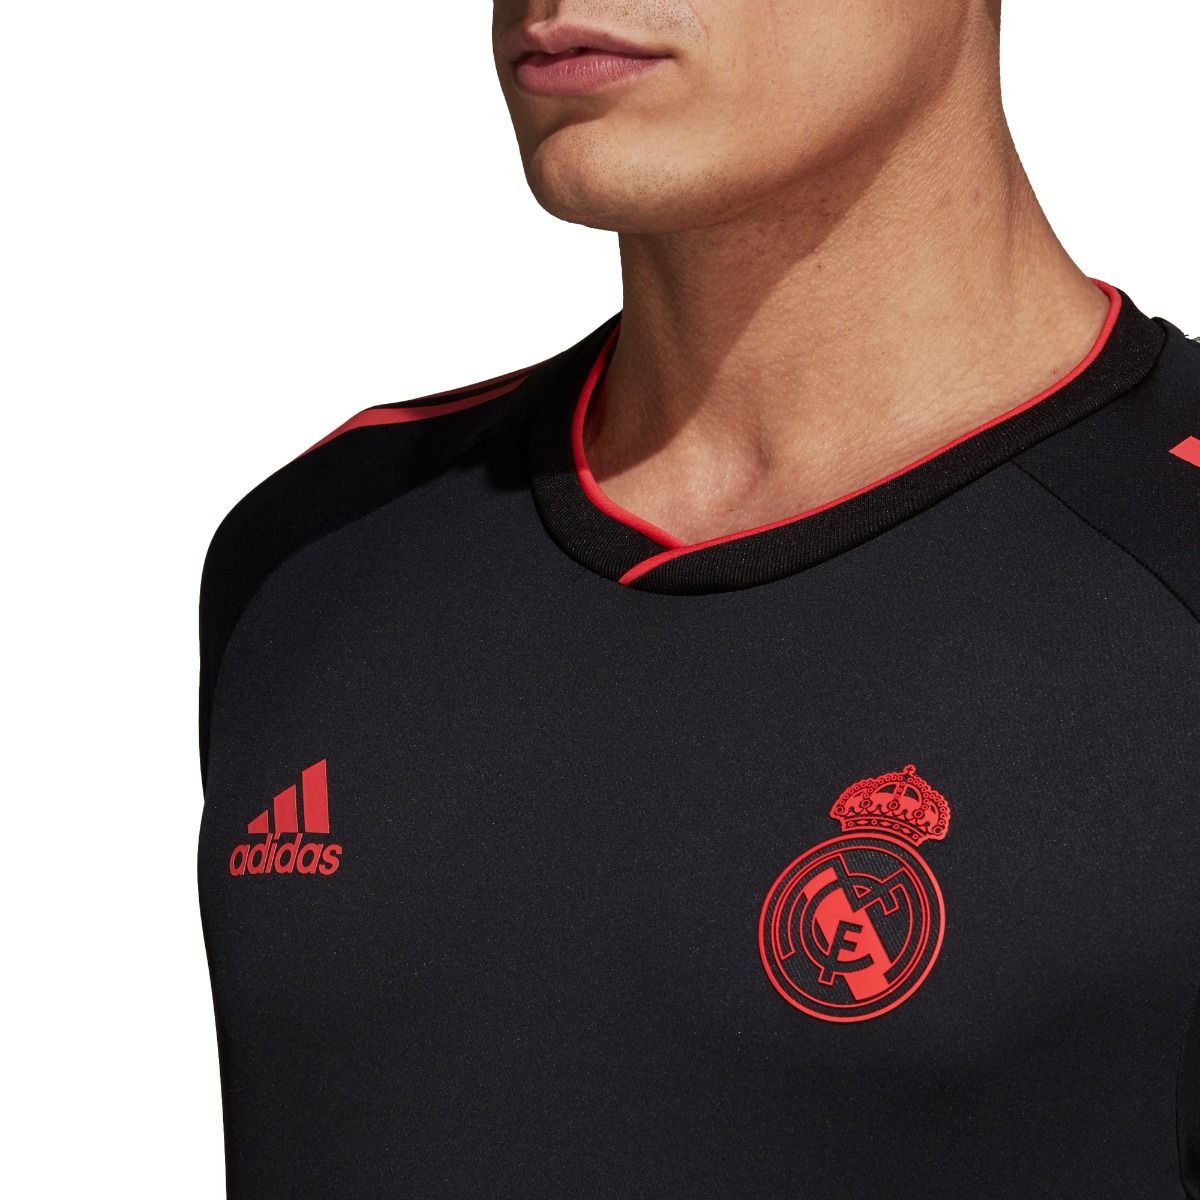 real madrid coral jersey